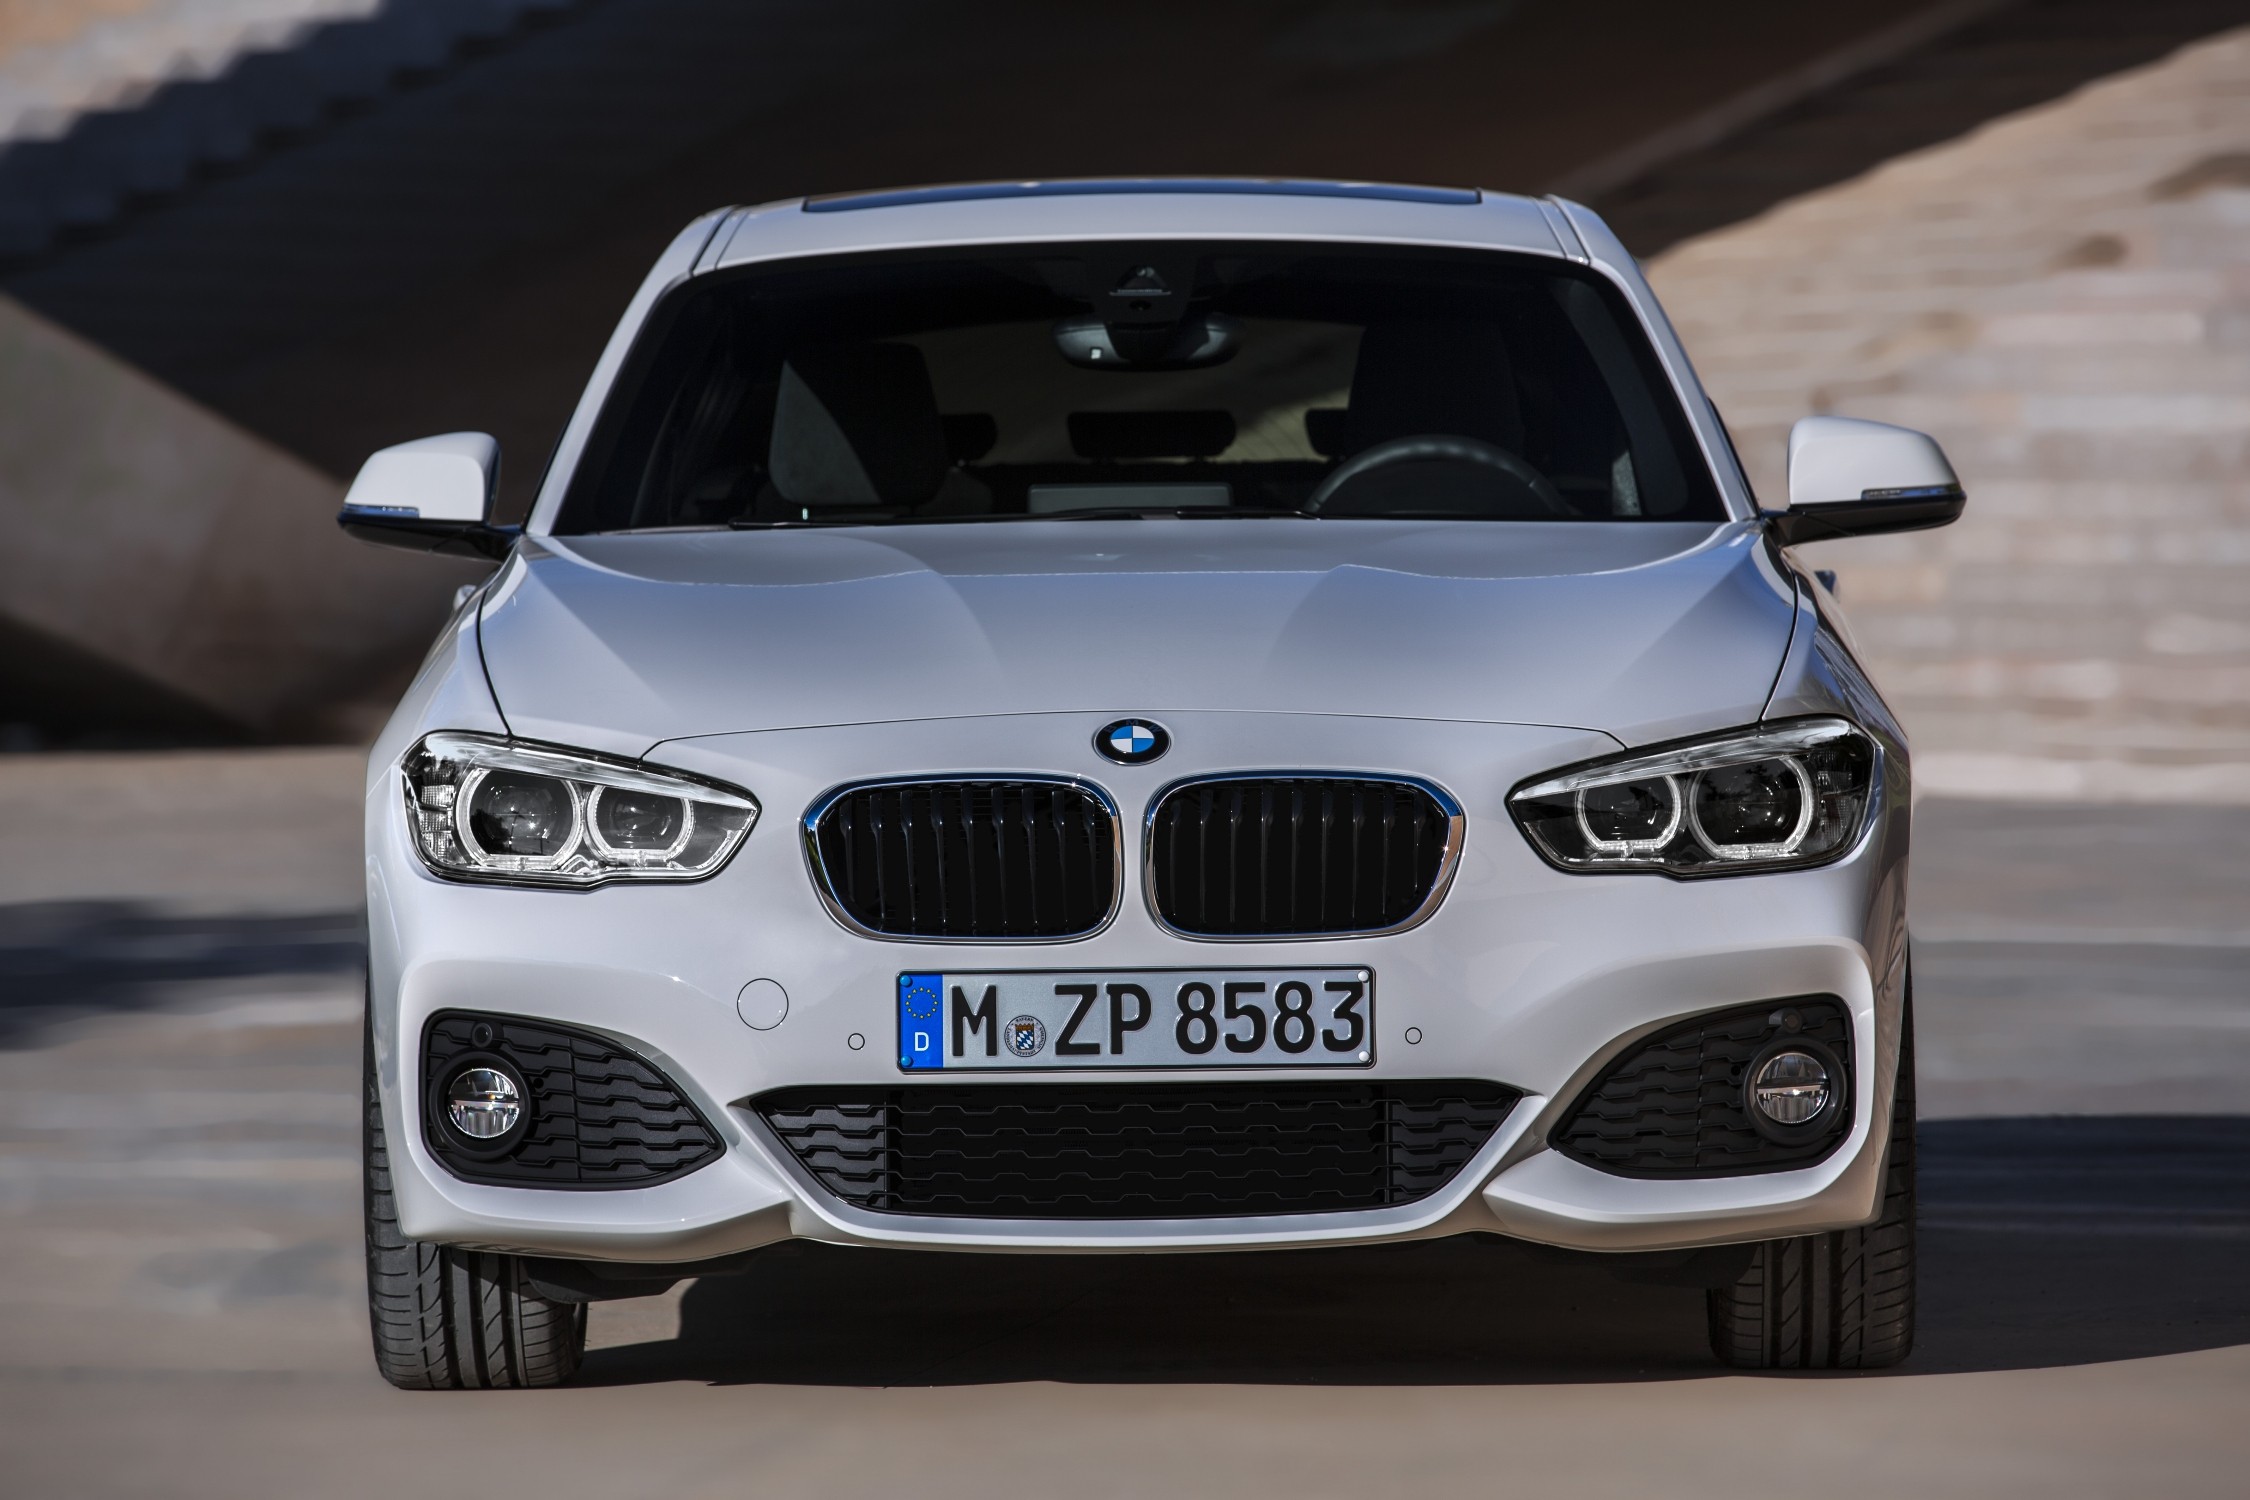 The BMW 1 Series for 2015